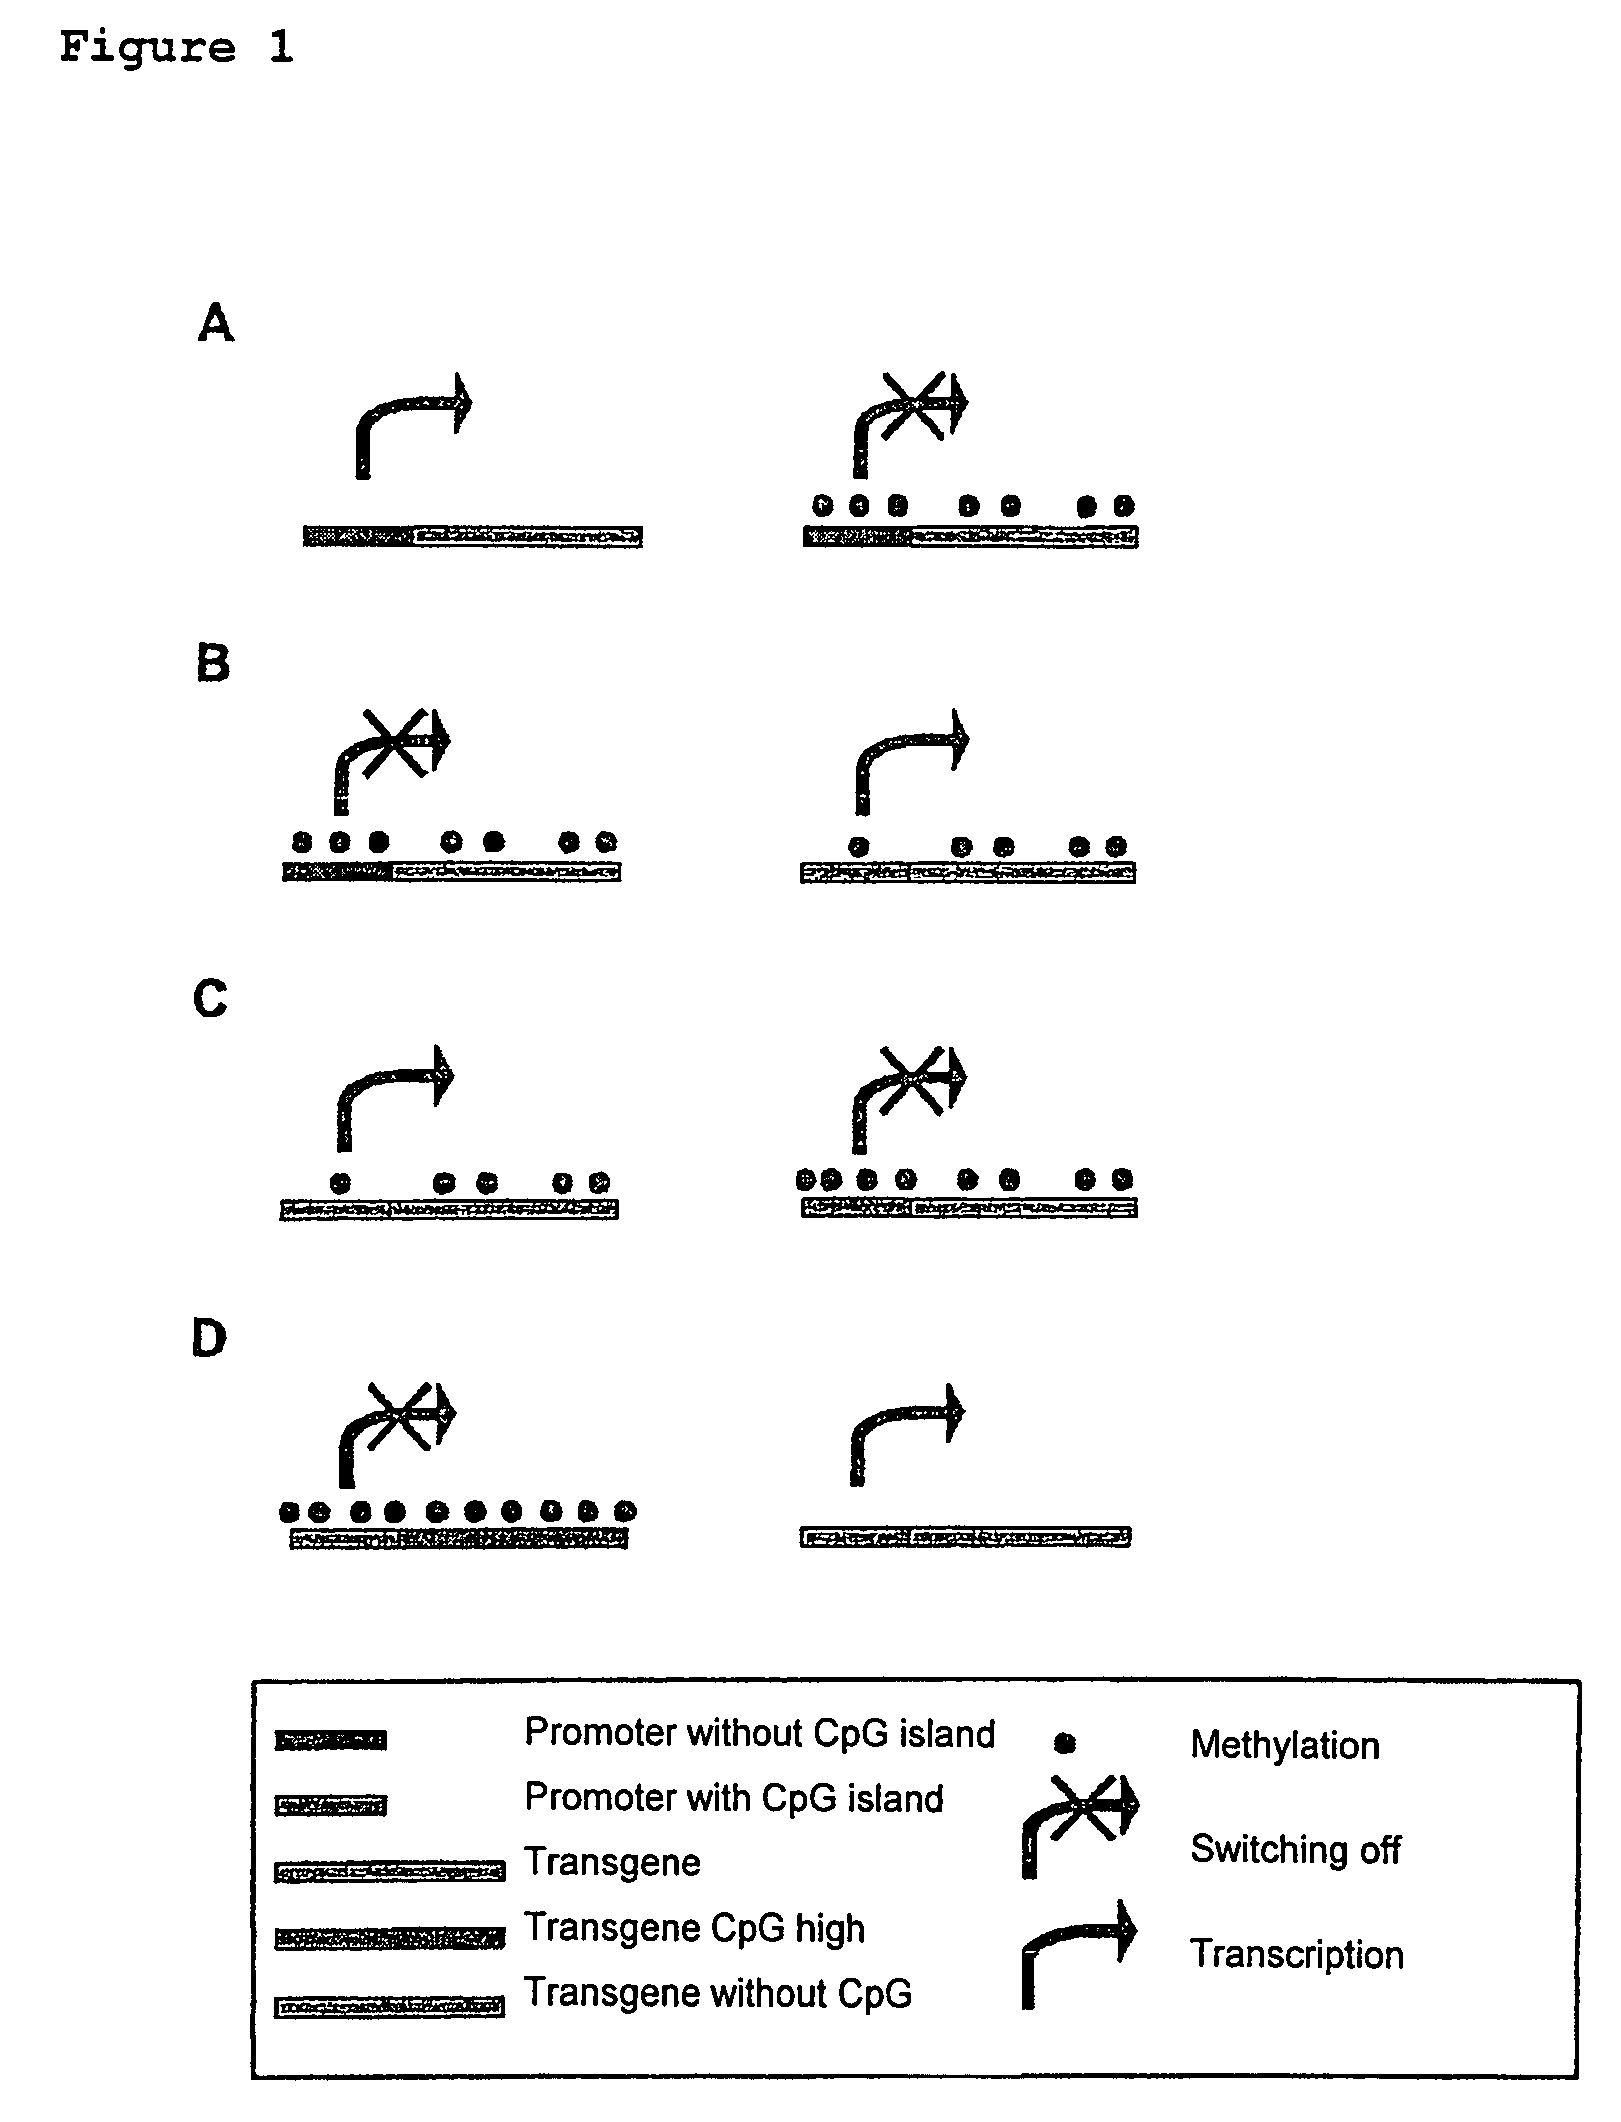 Method for modulating gene expression by modifying the CpG content